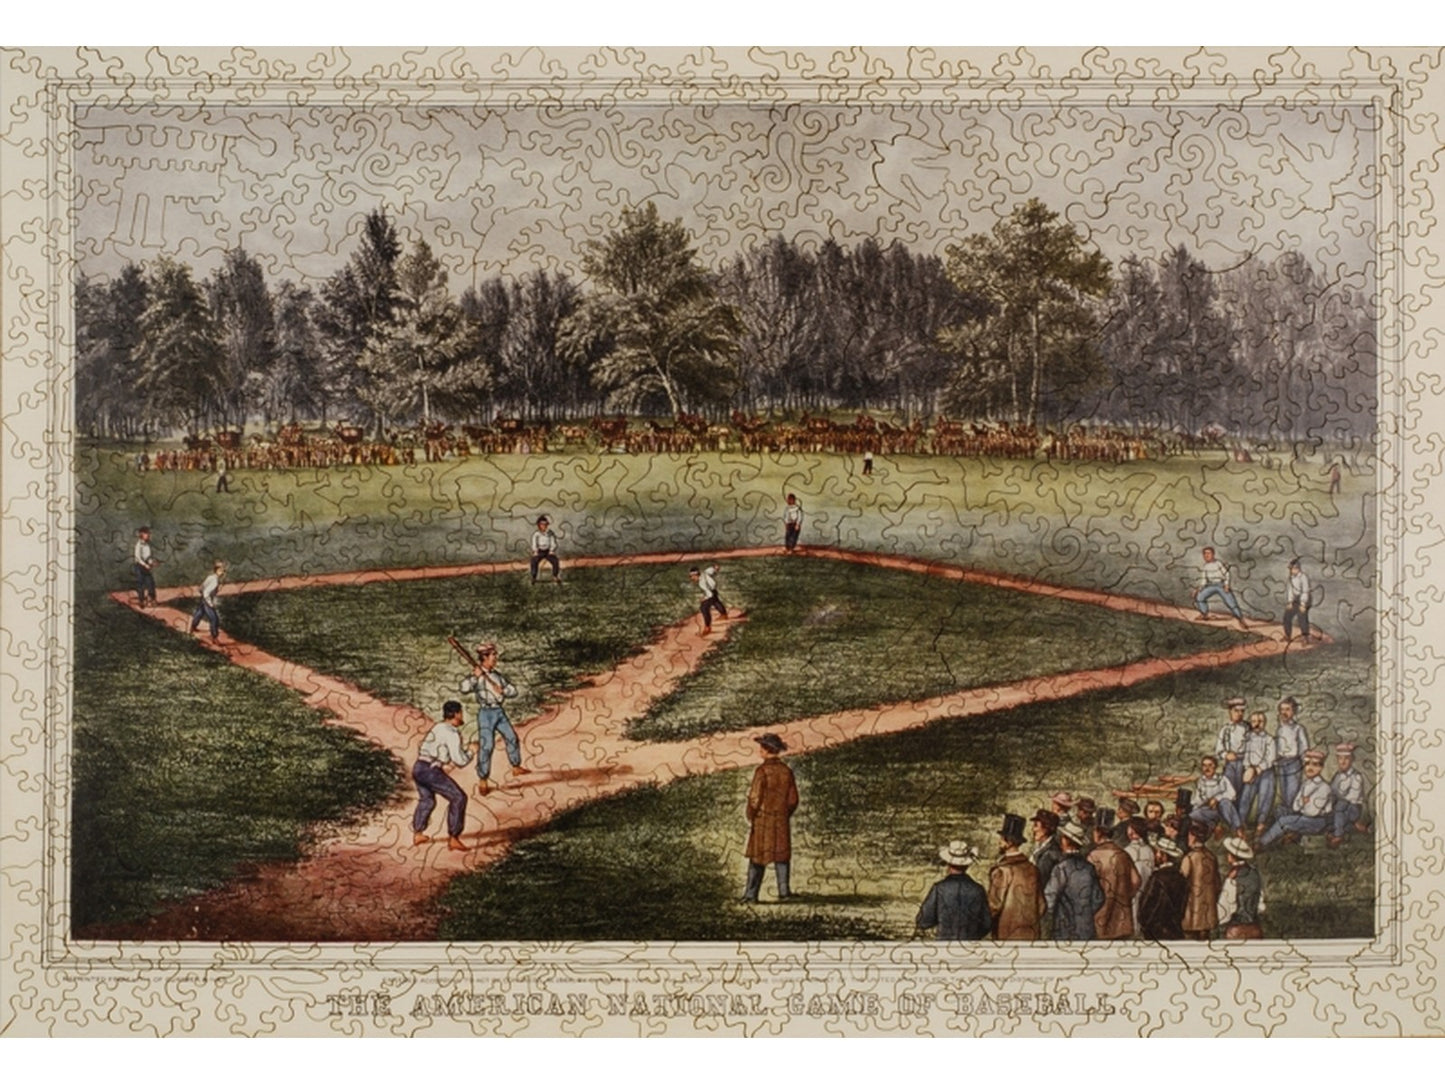 The front of the puzzle, The American National Game of Baseball, which shows a group of people playing baseball.